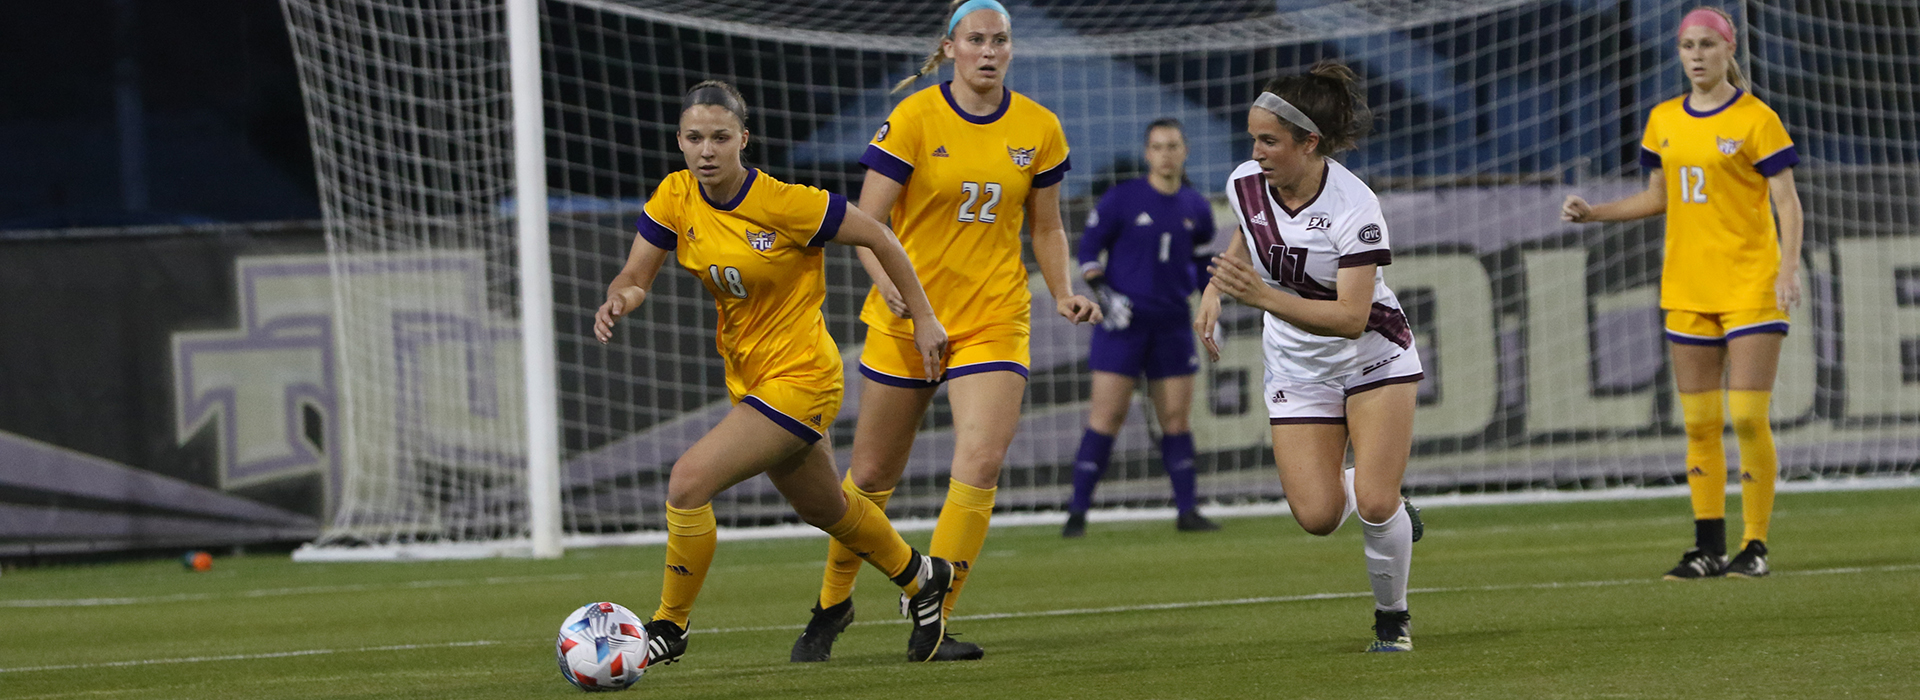 Golden Eagles wrap up spring with 1-1 draw vs. Eastern Kentucky